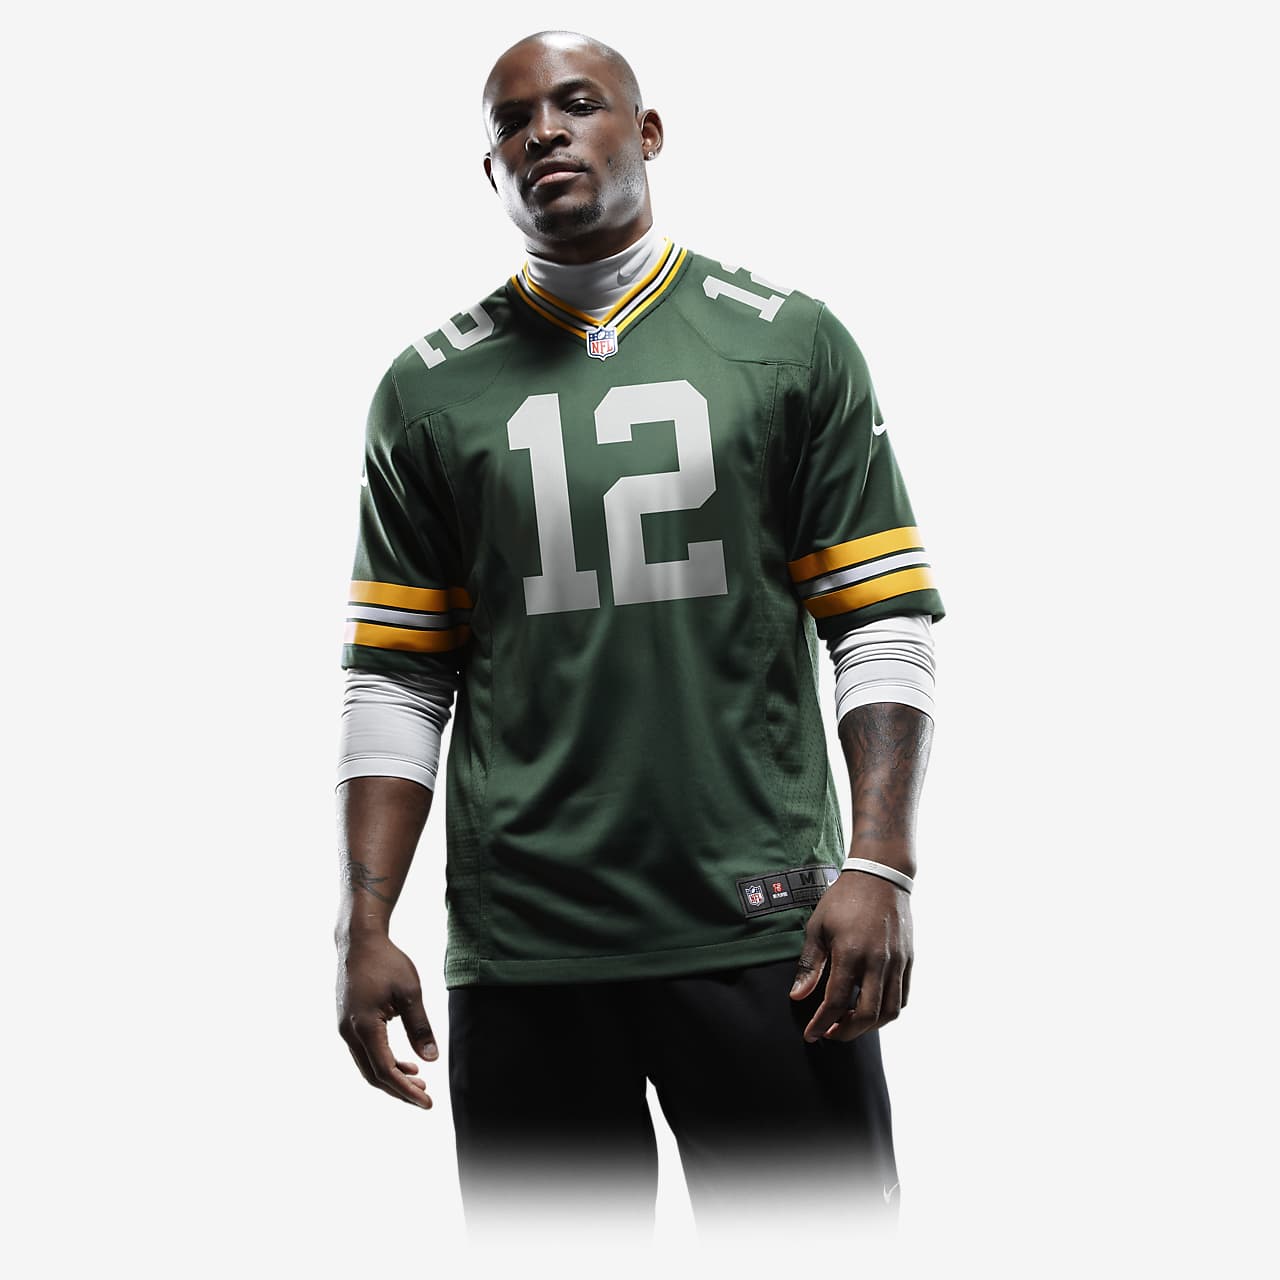 NFL Green Bay Packers (Aaron Rodgers) Men's Game Football Jersey. Nike.com